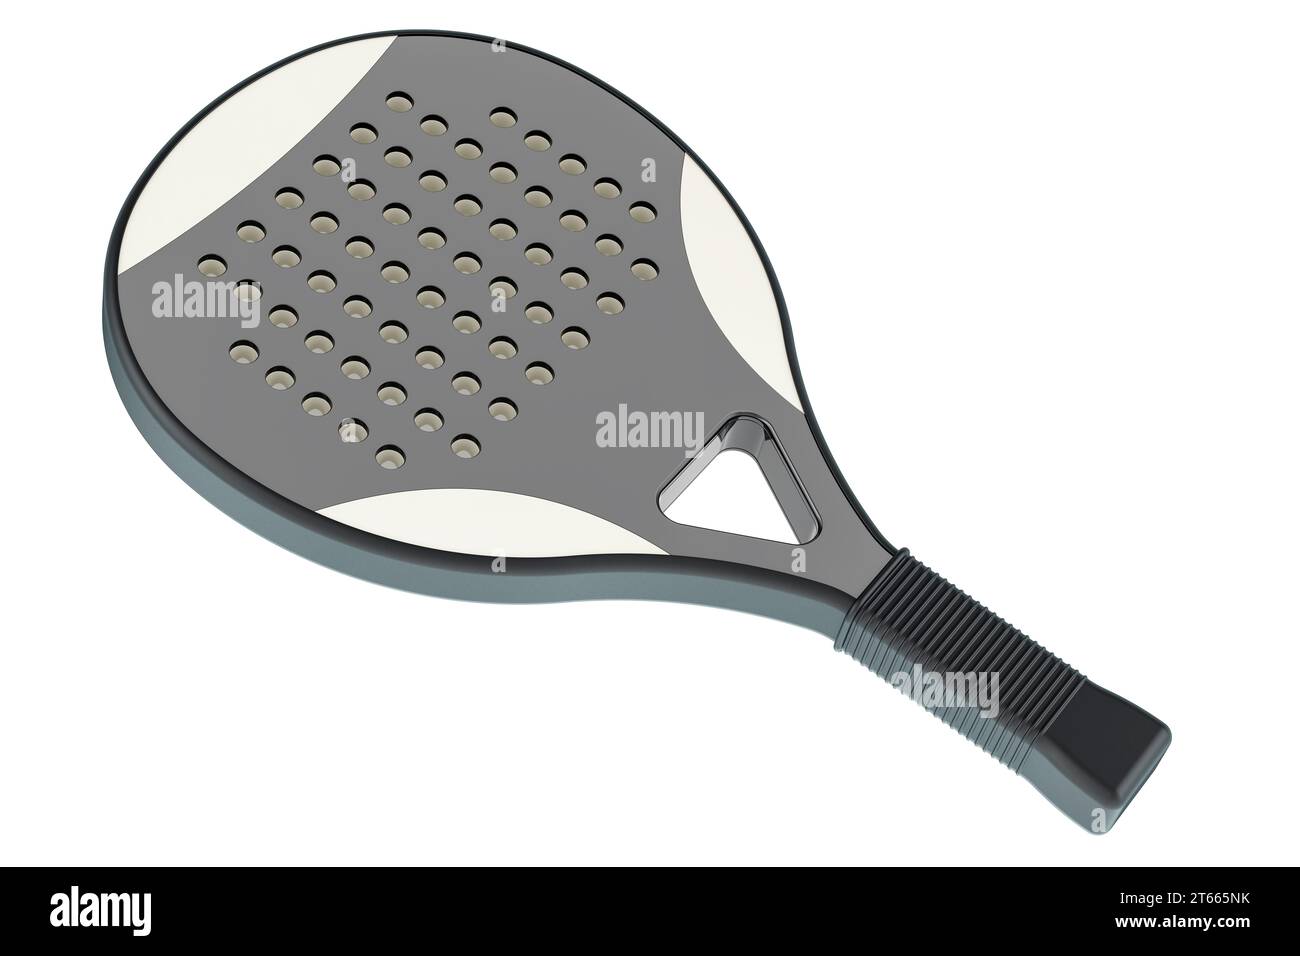 Paddle Tennis Racket, 3D rendering isolated on white background Stock Photo